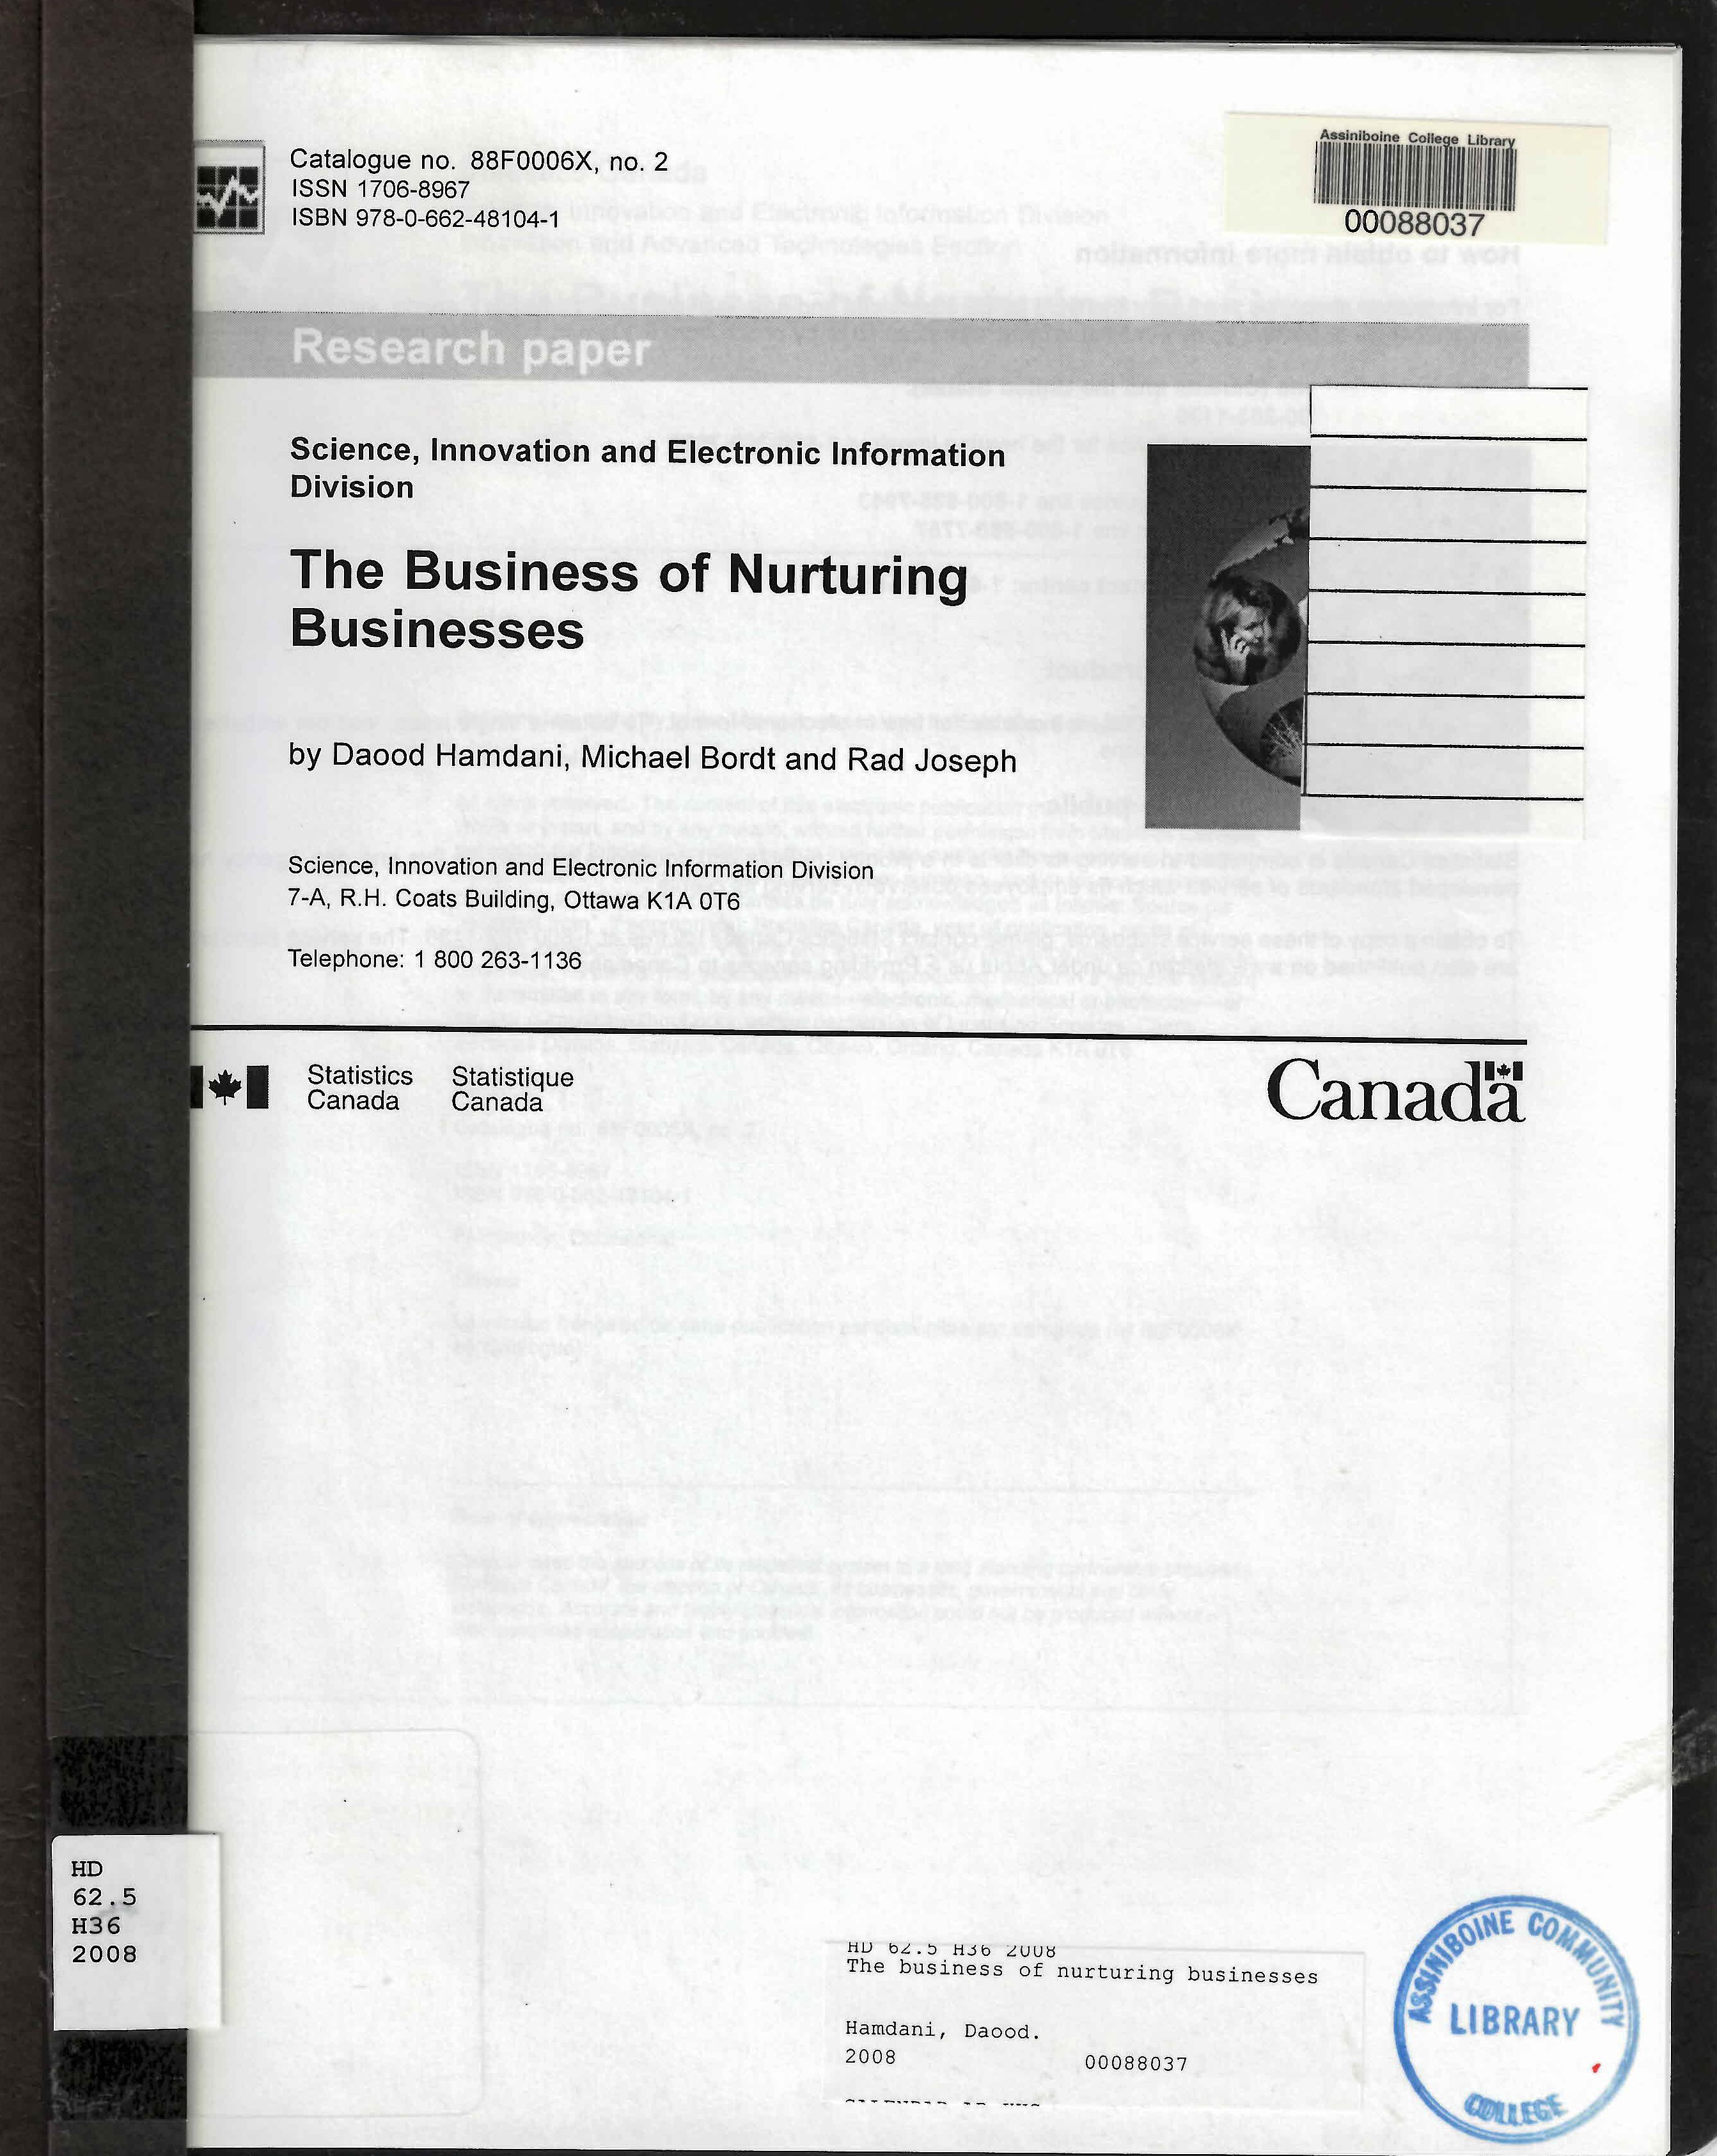 The business of nurturing businesses